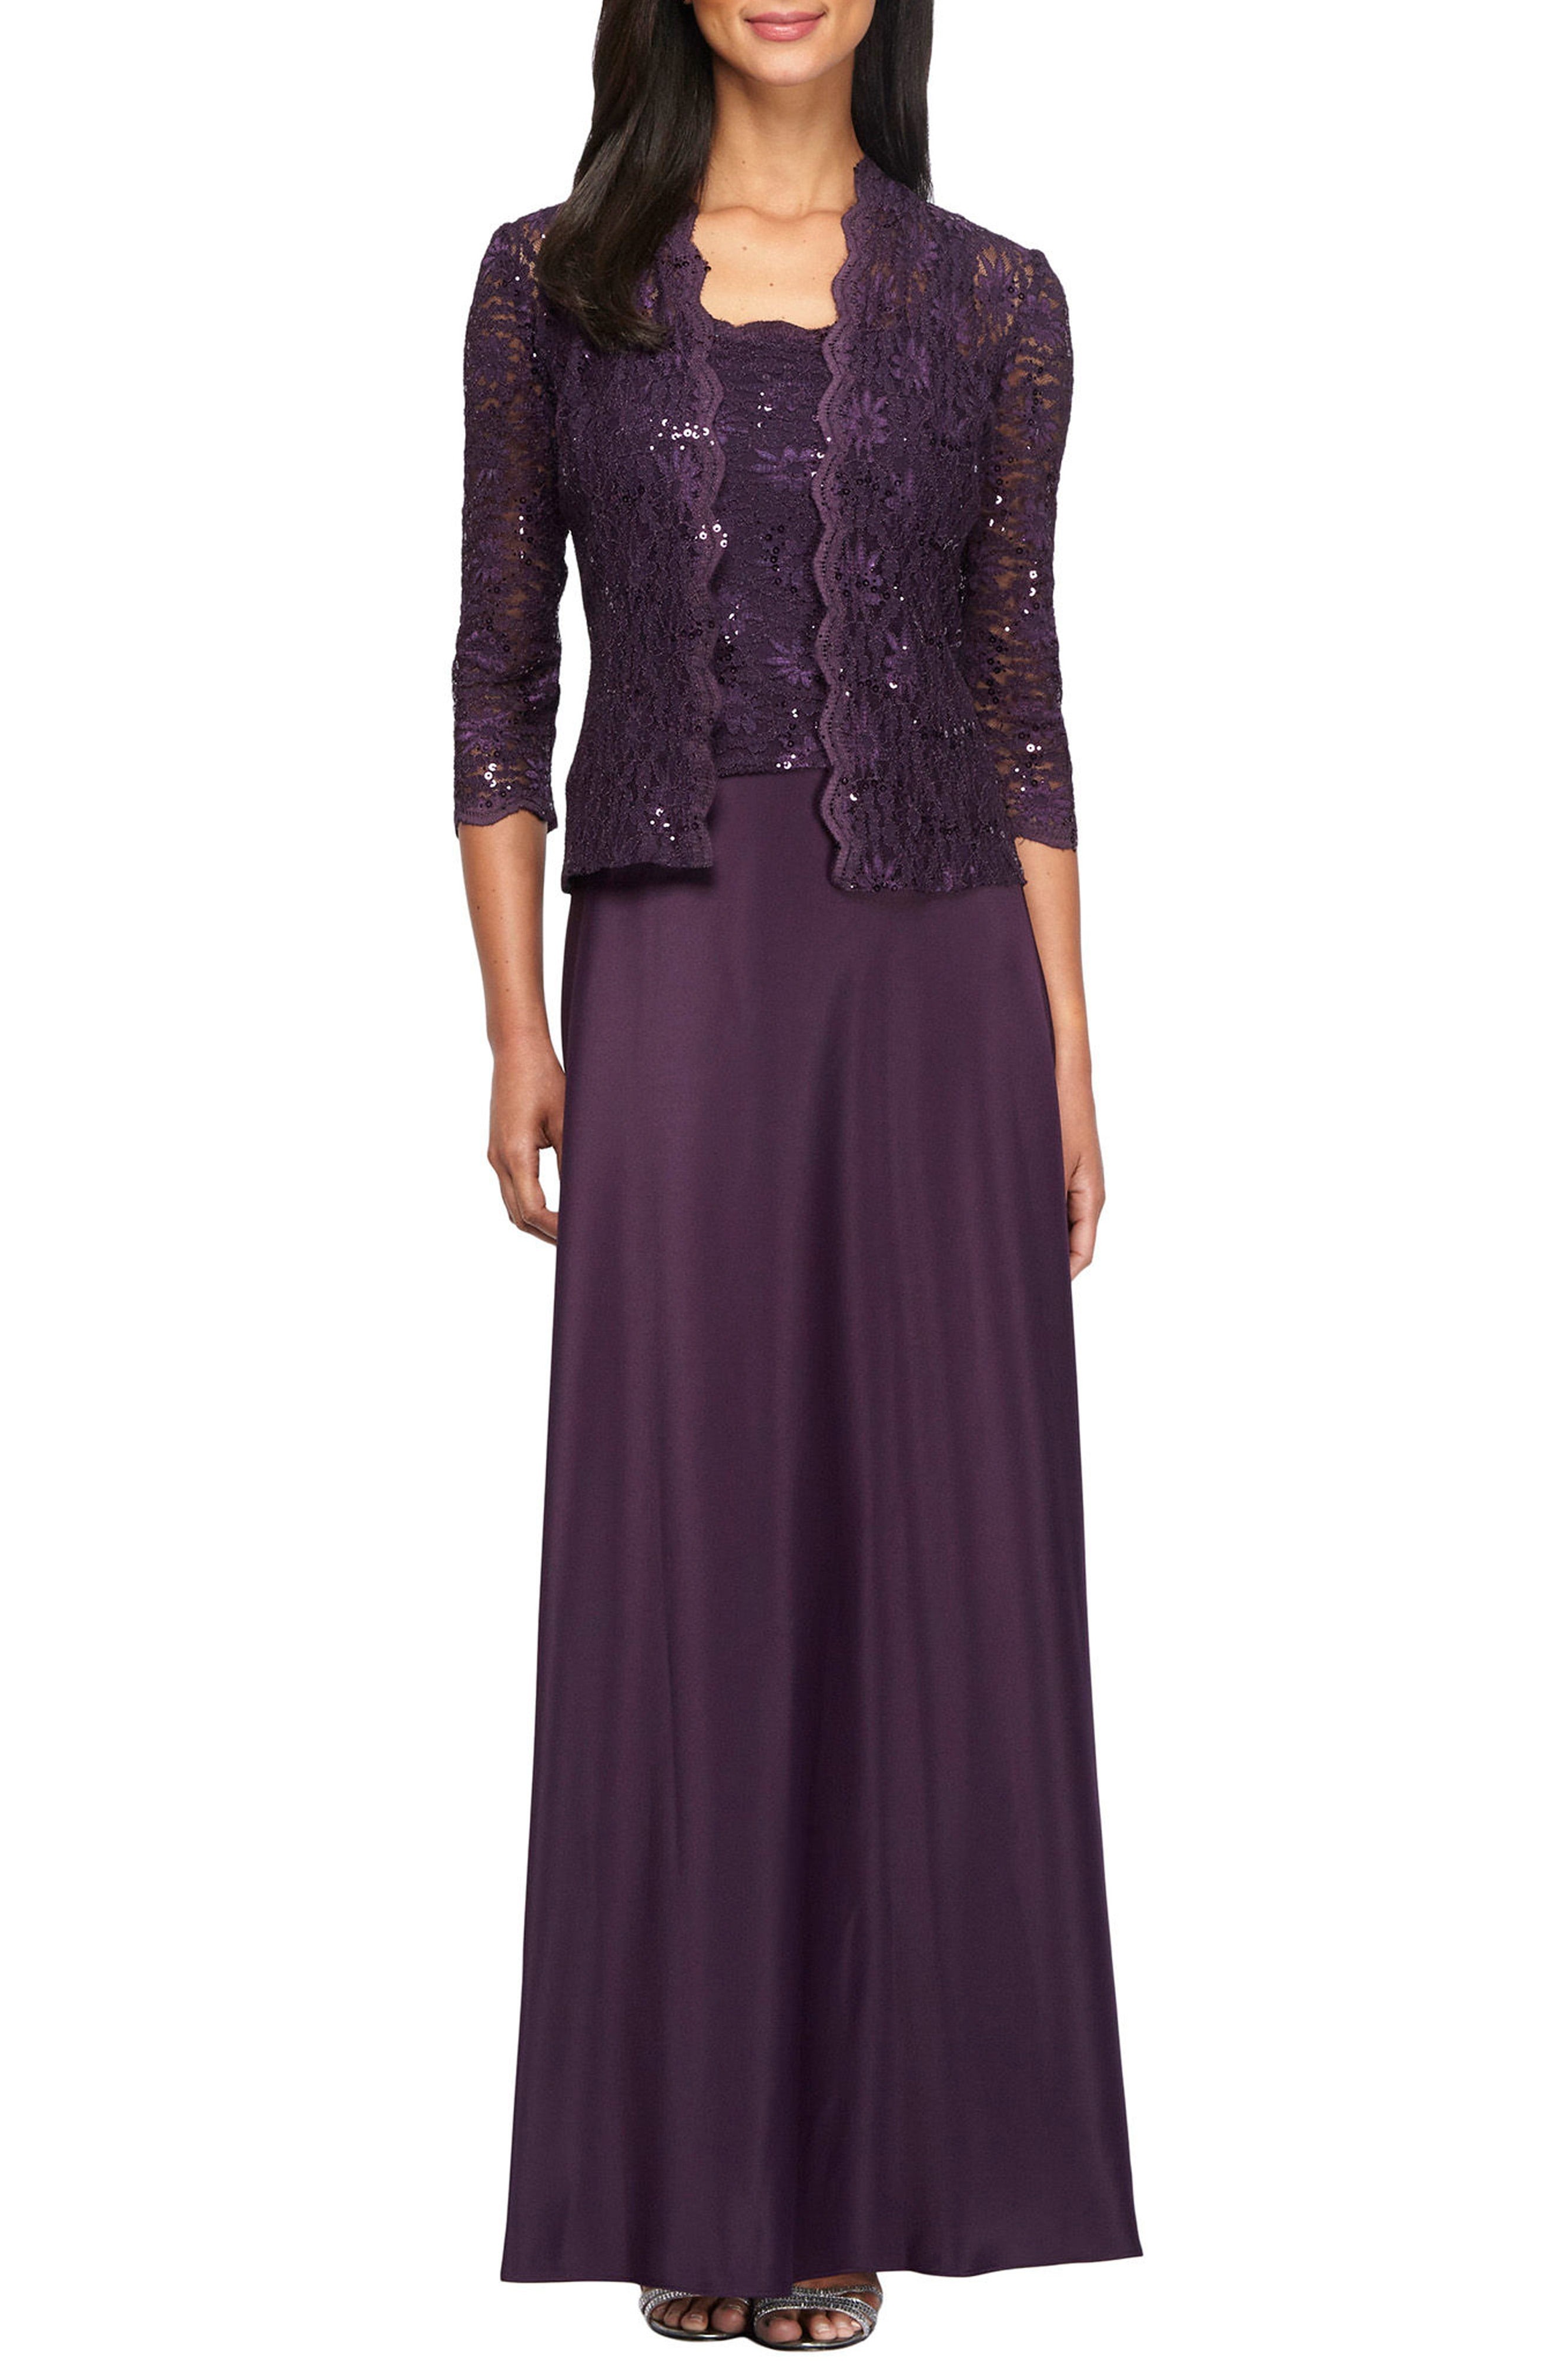 dresses for grandmothers to wear to a wedding